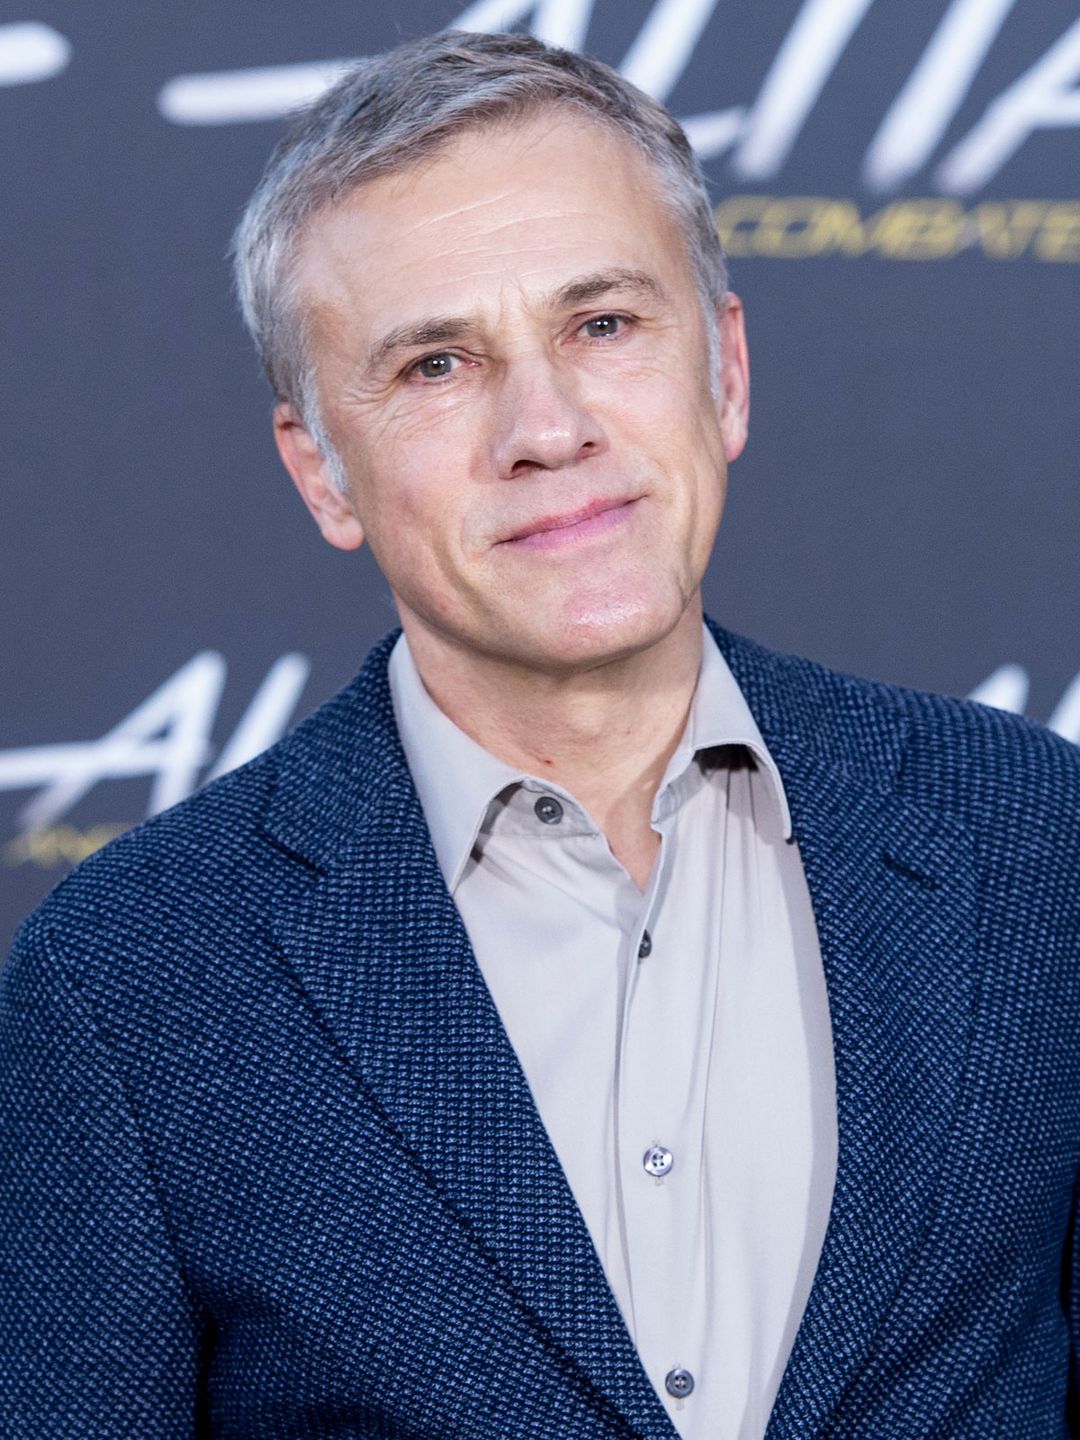 Christoph Waltz who is his mother